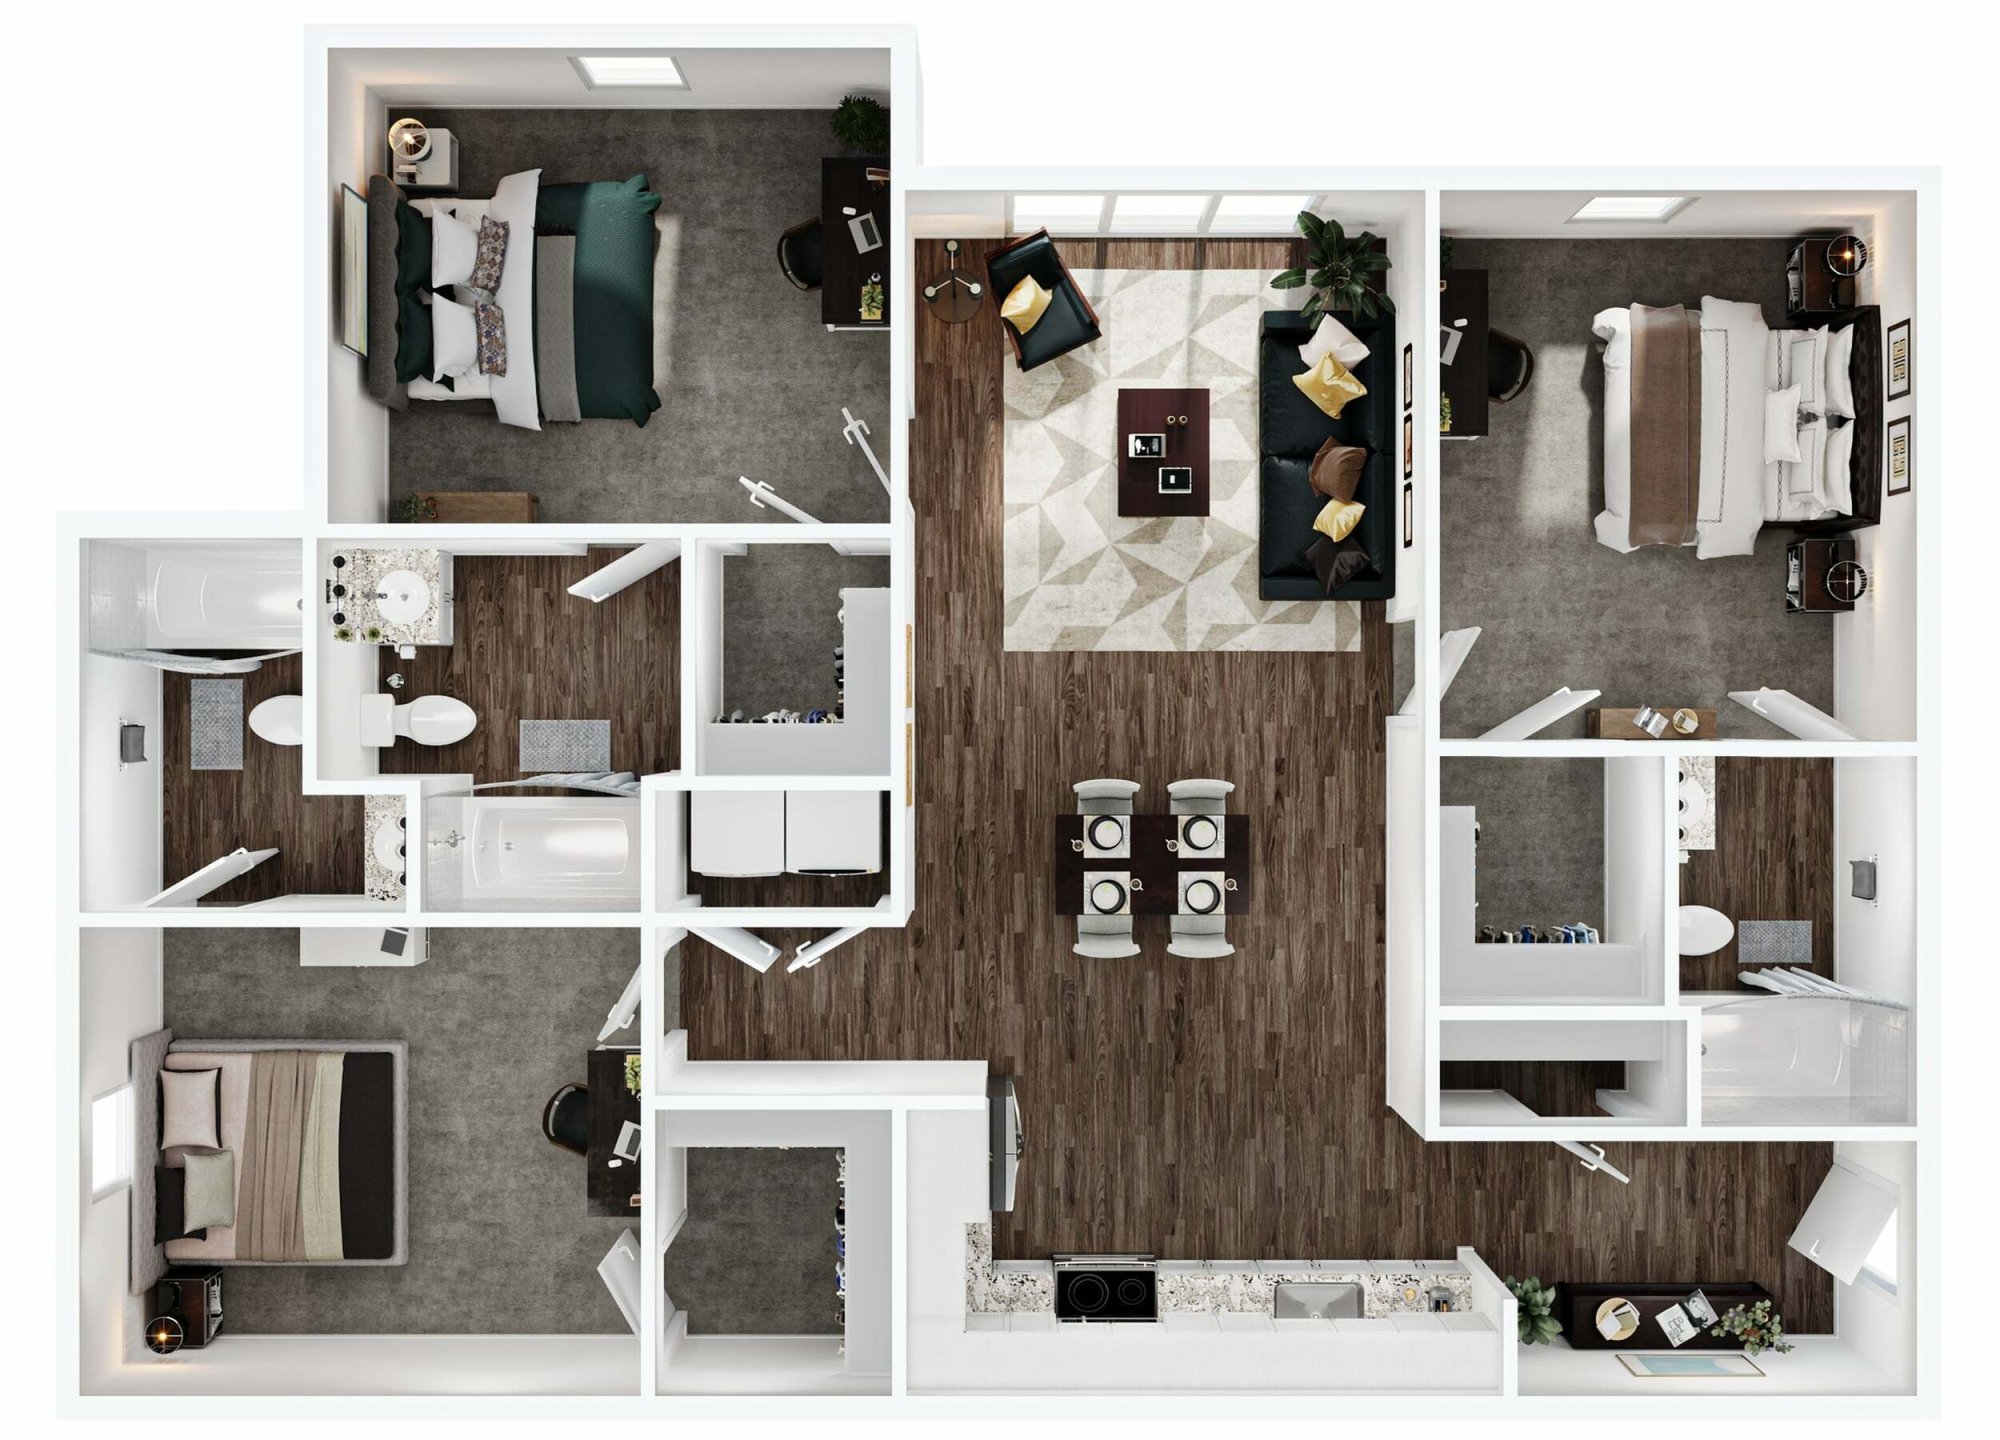 A 3D image of the 3BR/3BA – Deluxe floorplan, a 1390 squarefoot, 3 bed / 3 bath unit